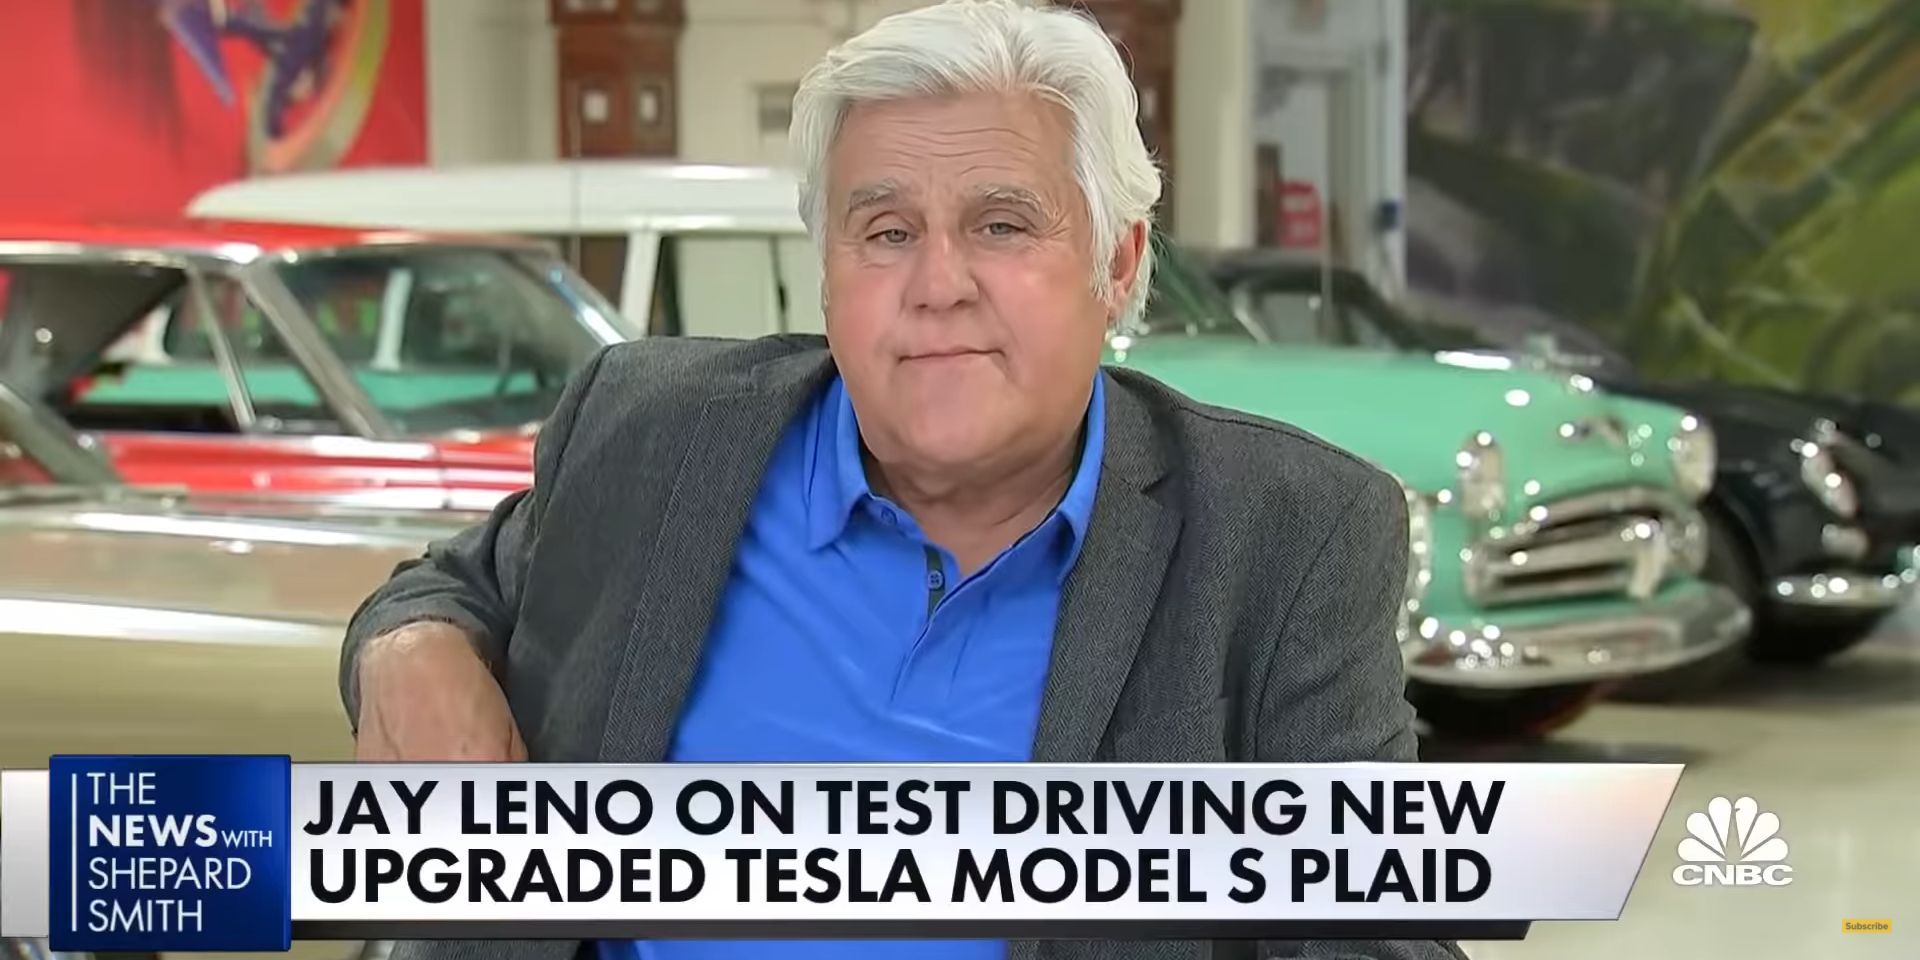 Jay Leno being interviewed about Tesla Model S Plaid